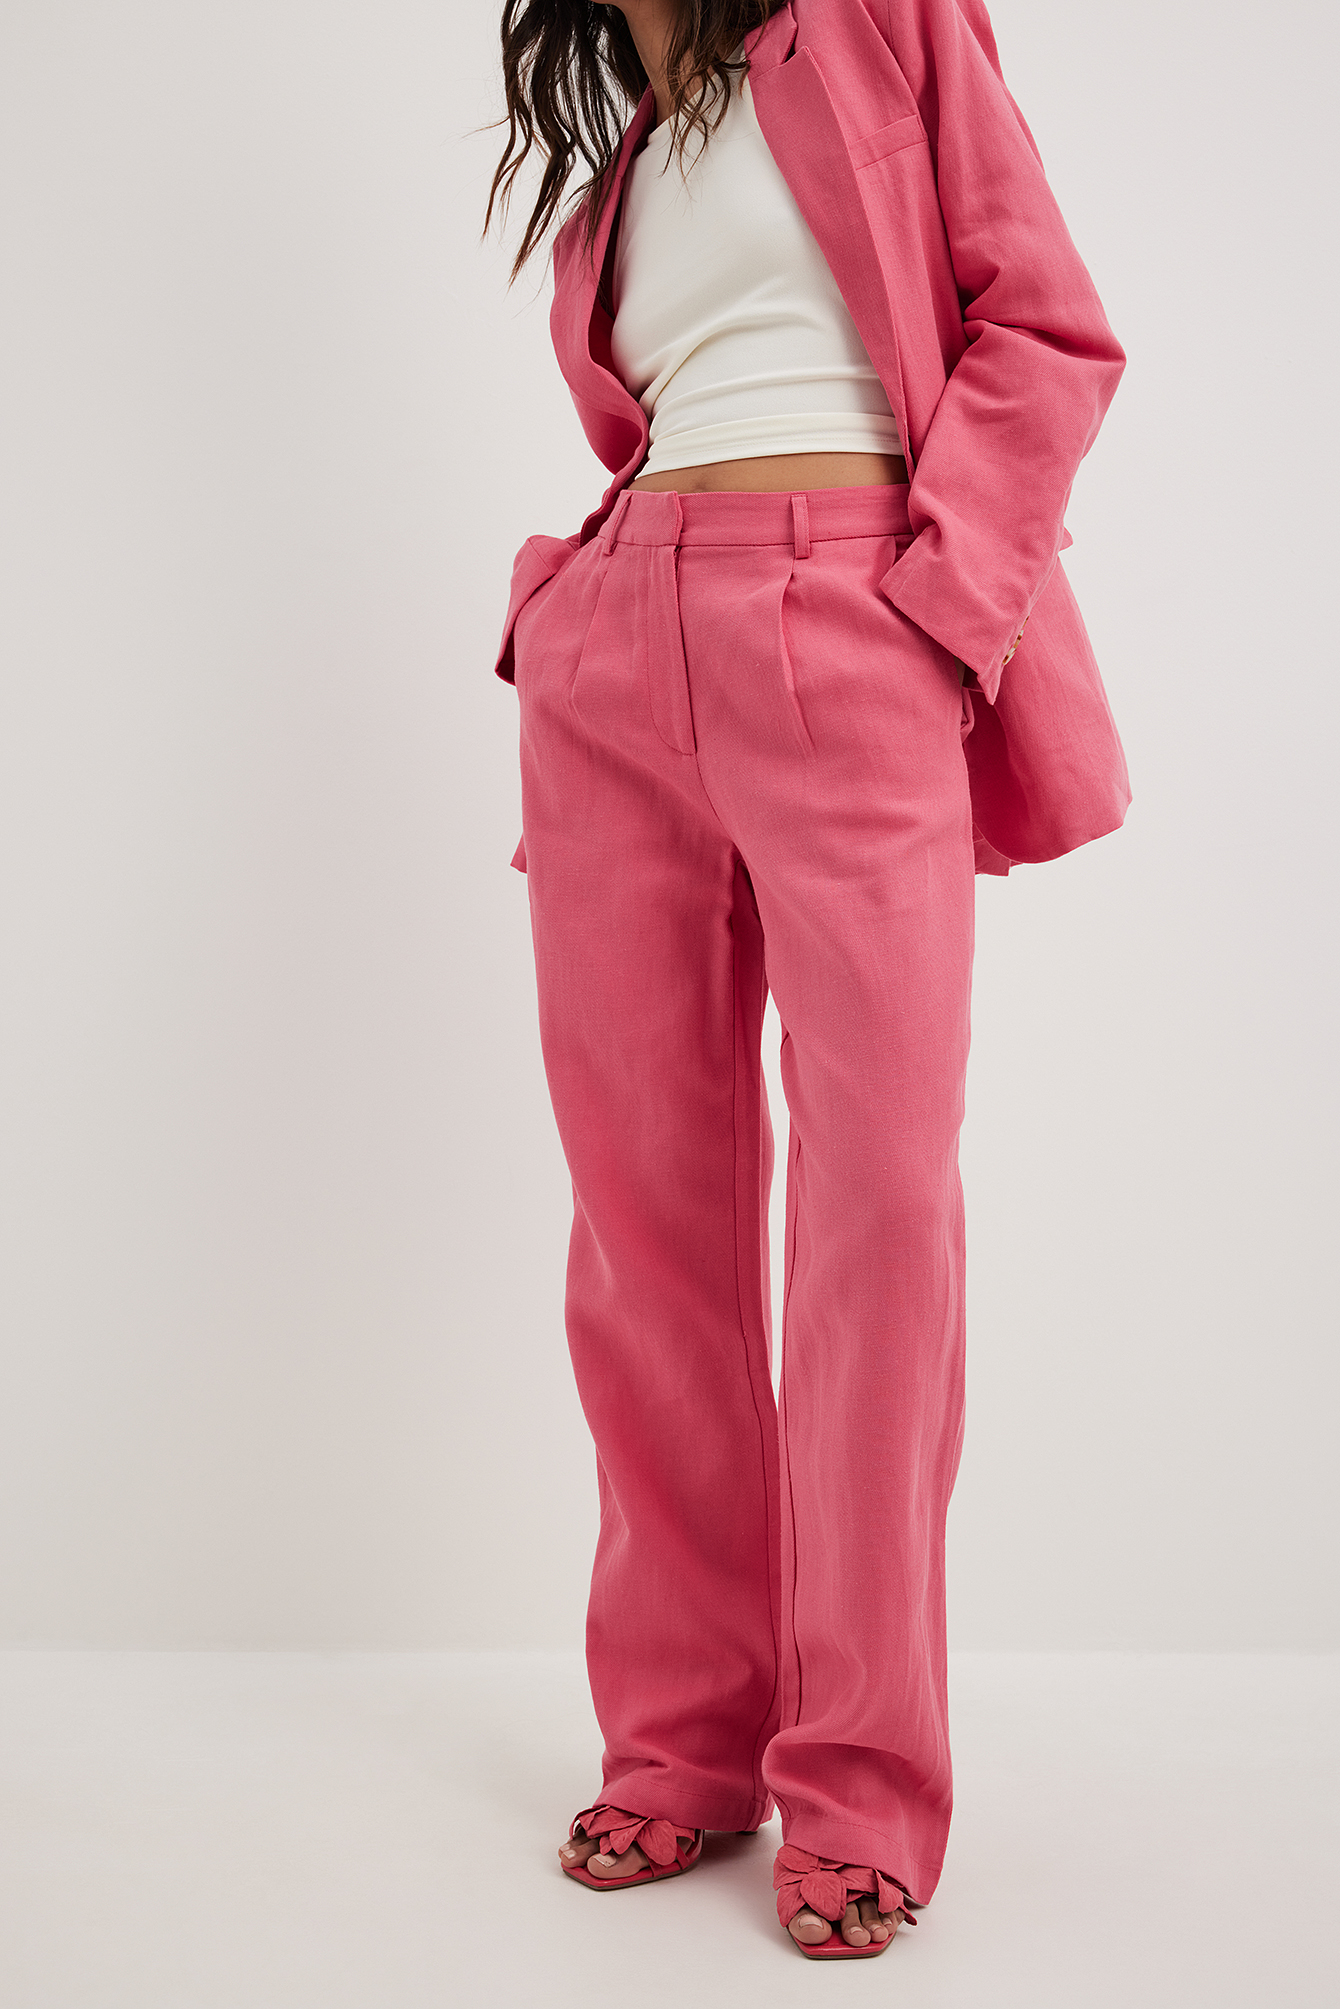 7 Chic Outfits With Pink Pants